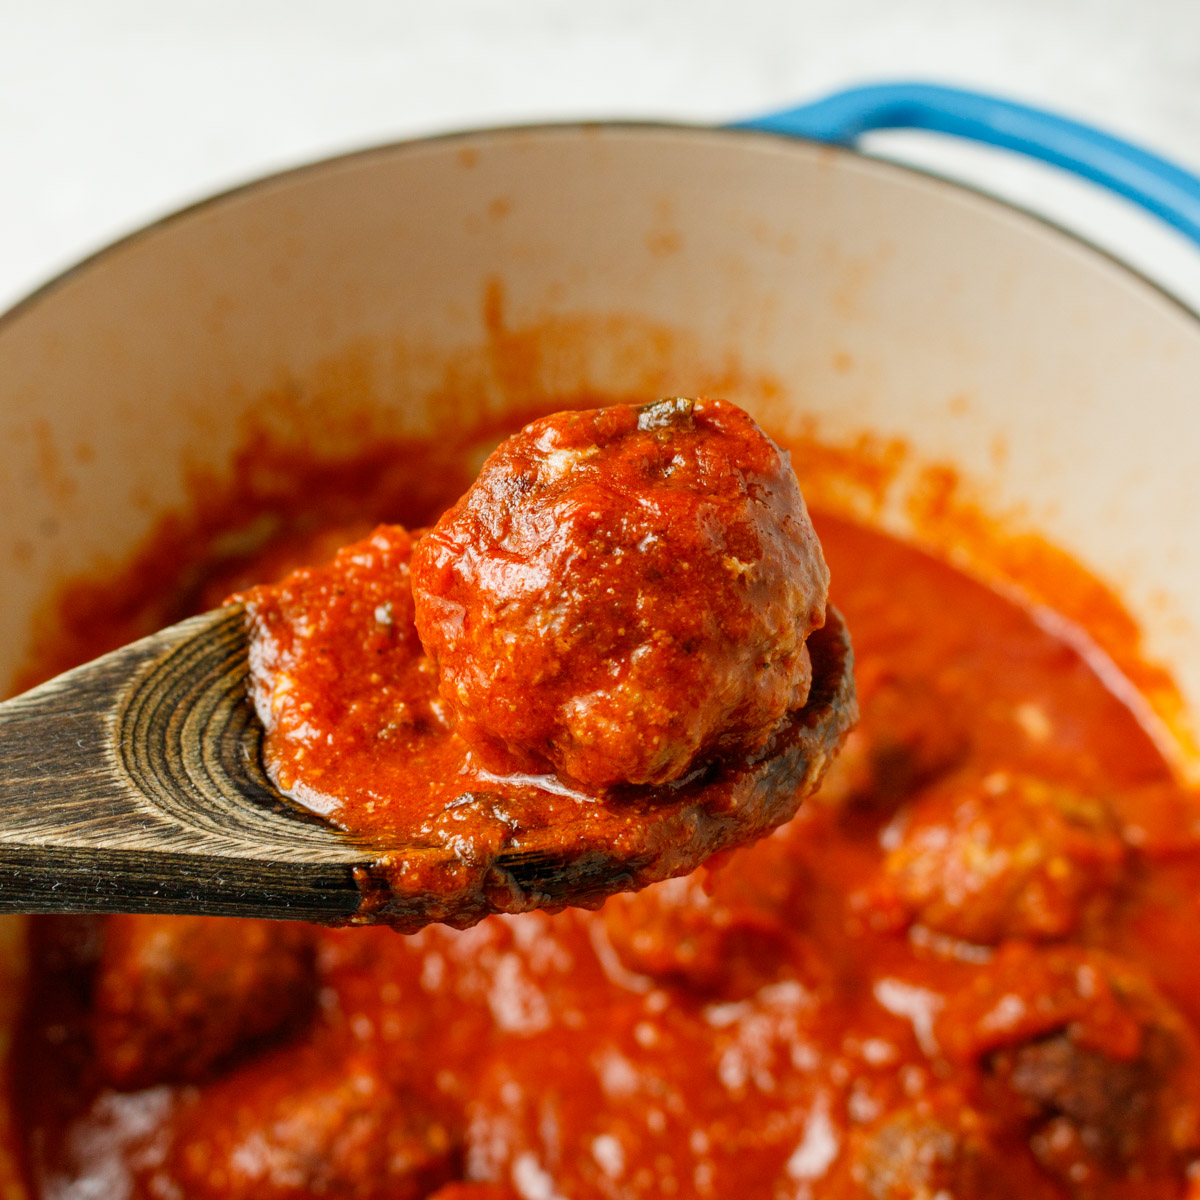 A meatball on a wooden spoon over a dutch oven of meatballs.